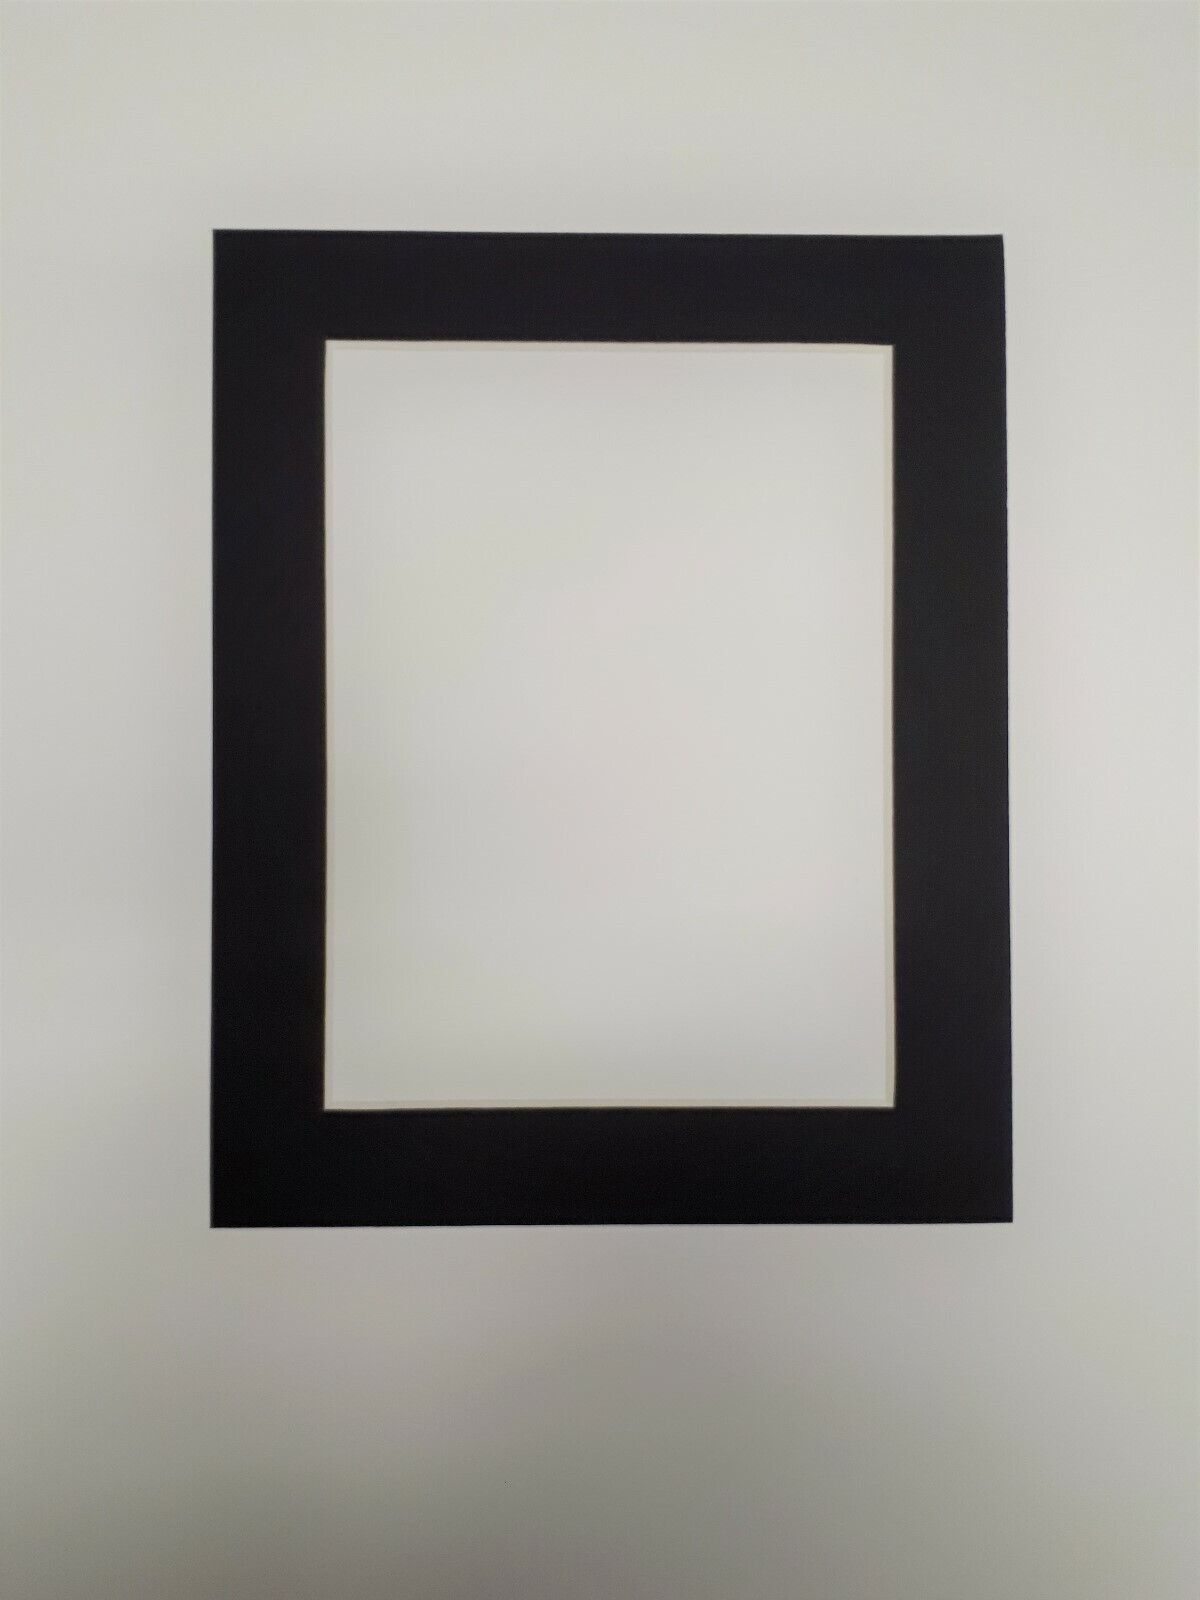 A3 Size Mount with Bevel Cut Aperture Window at 12x9 inch for Art Photo Poster painting Picture